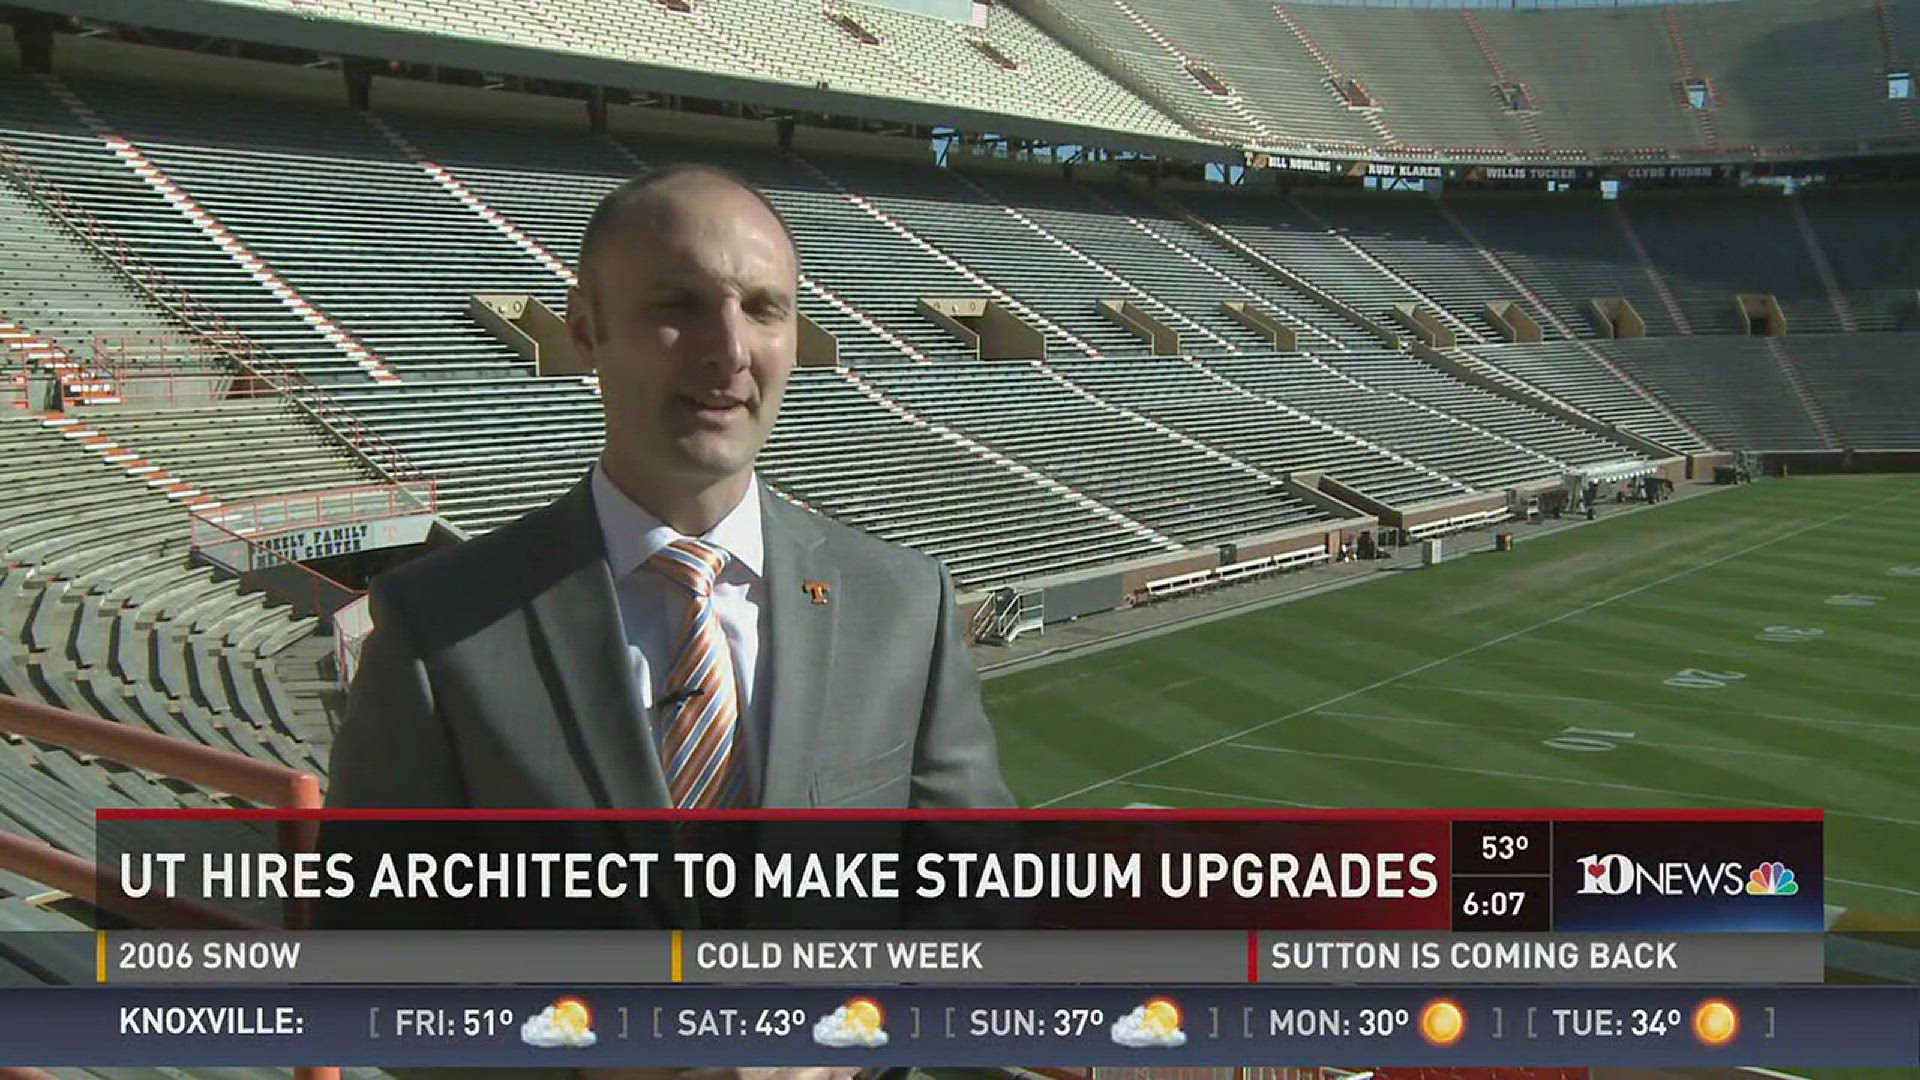 Renovations are being considered for Neyland Stadium. The University of Tennessee has hired an architect to make stadium upgrades. Jan. 14, 2016